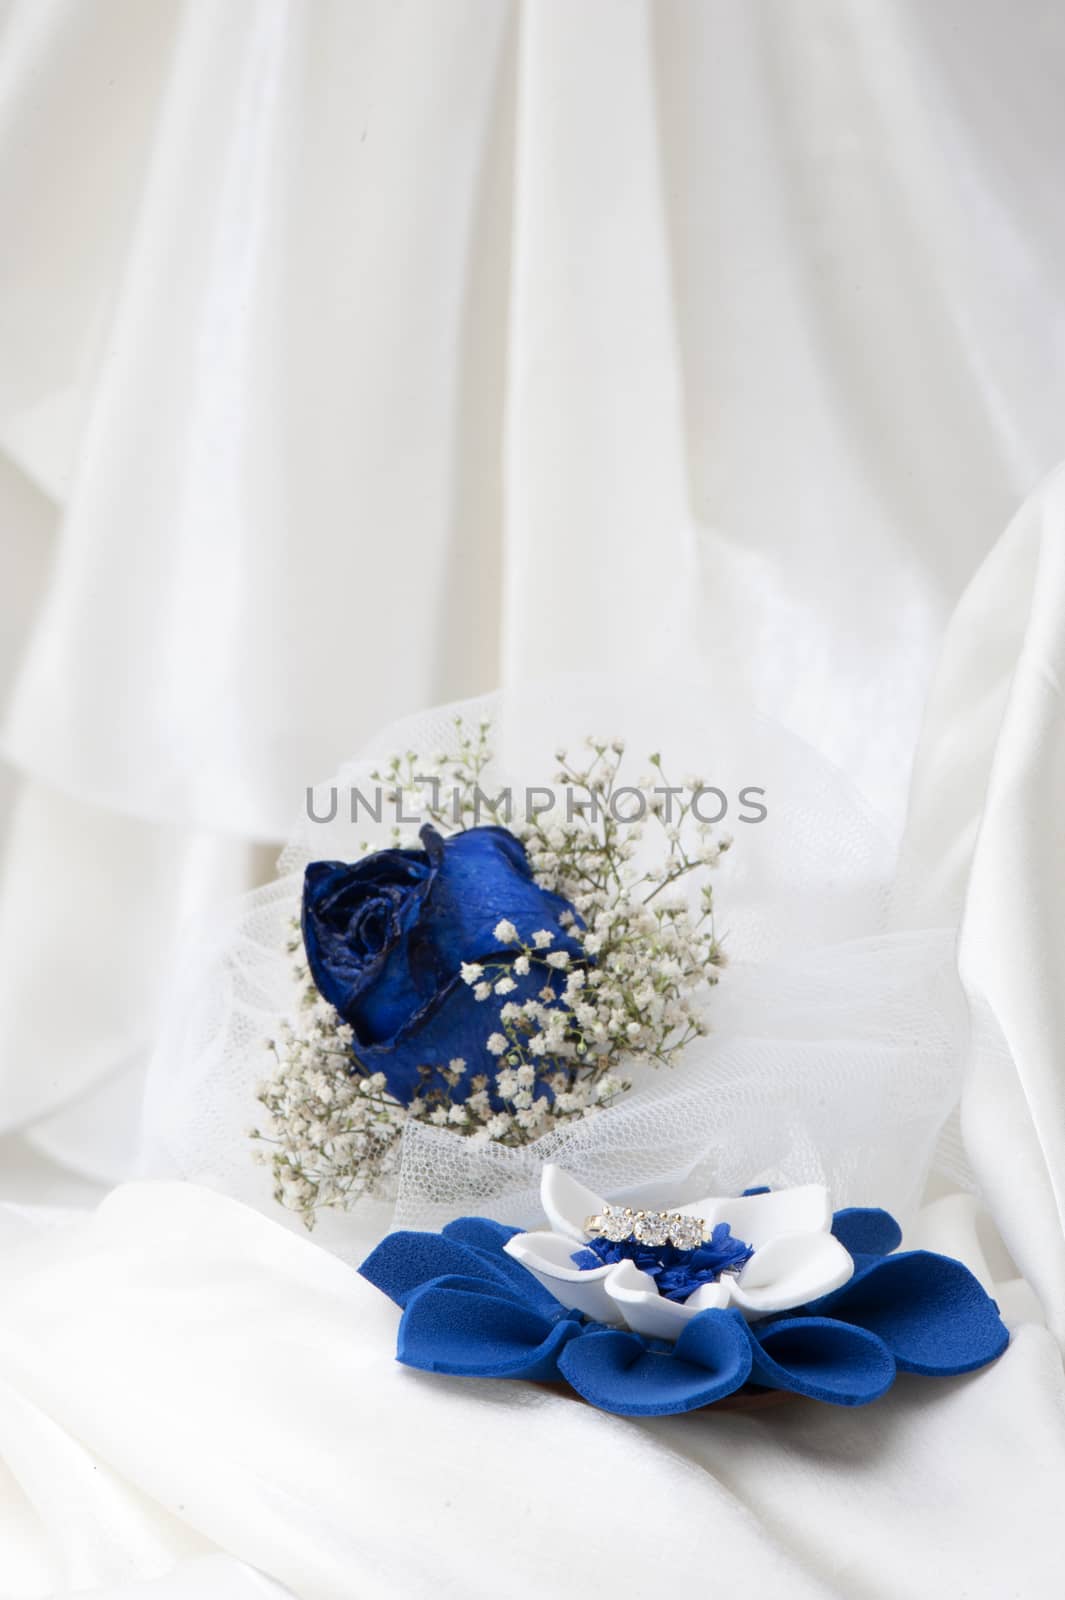 a  blue roses and wedding rings on white background